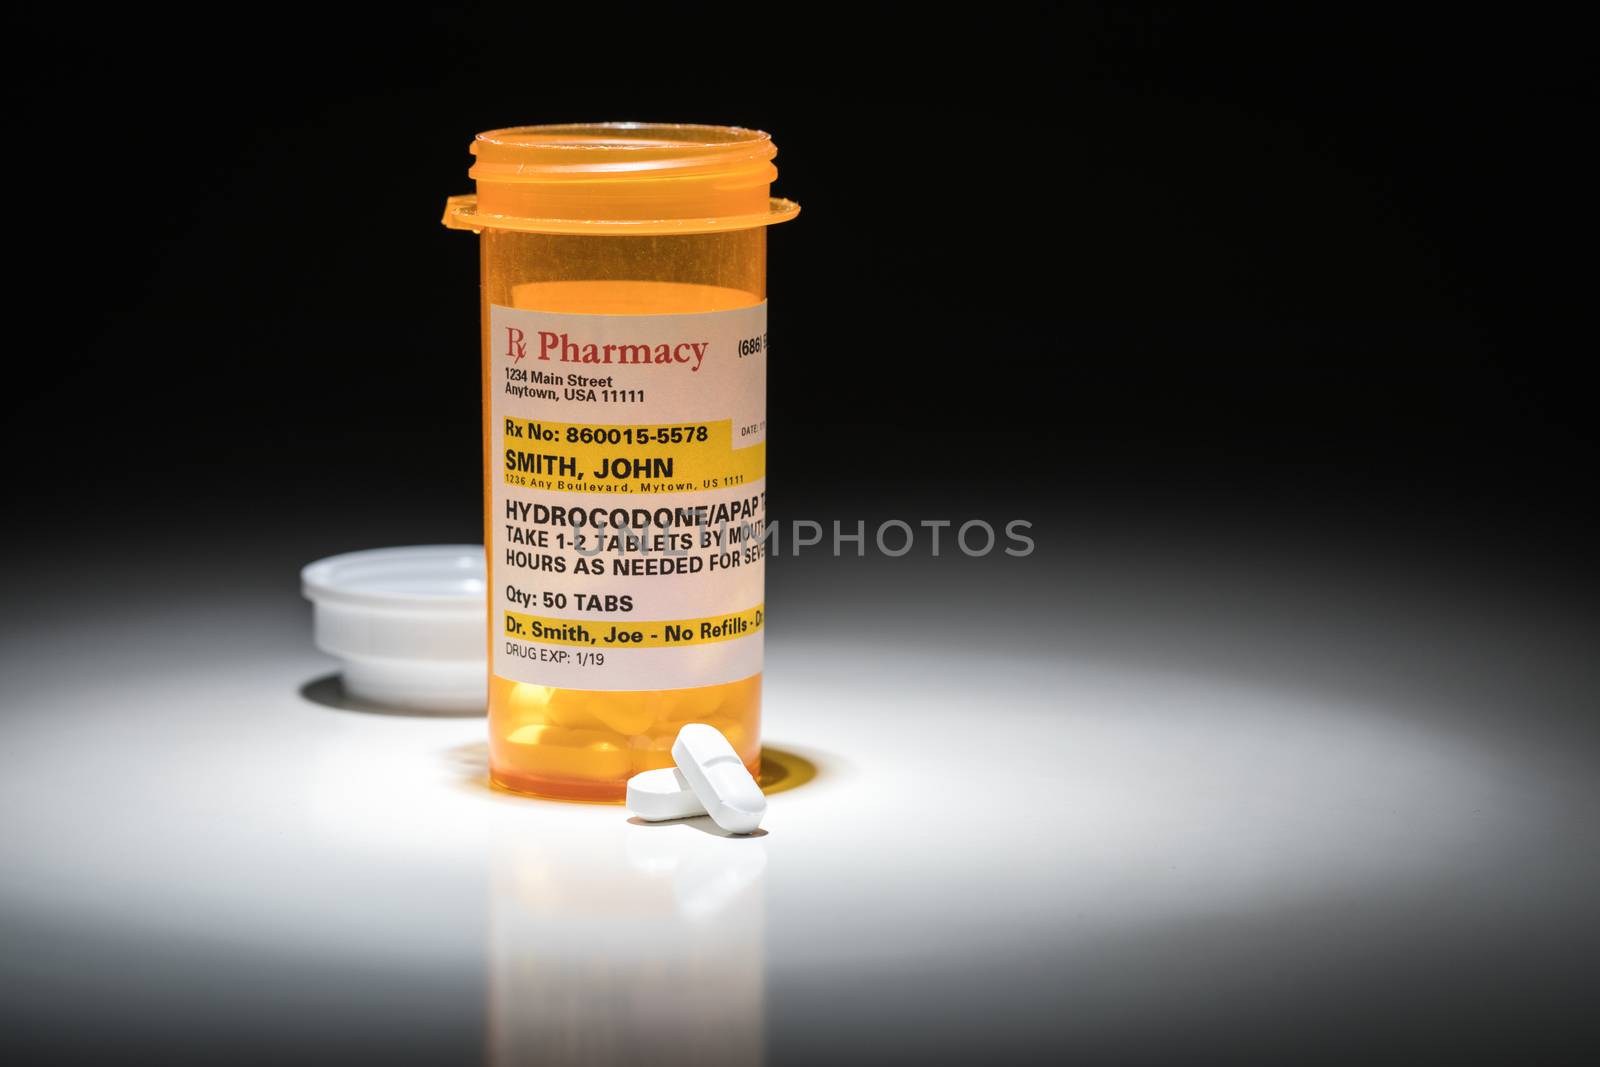 Hydrocodone Pills and Prescription Bottle with Non Proprietary Label. No model release required - contains ficticious information. by Feverpitched